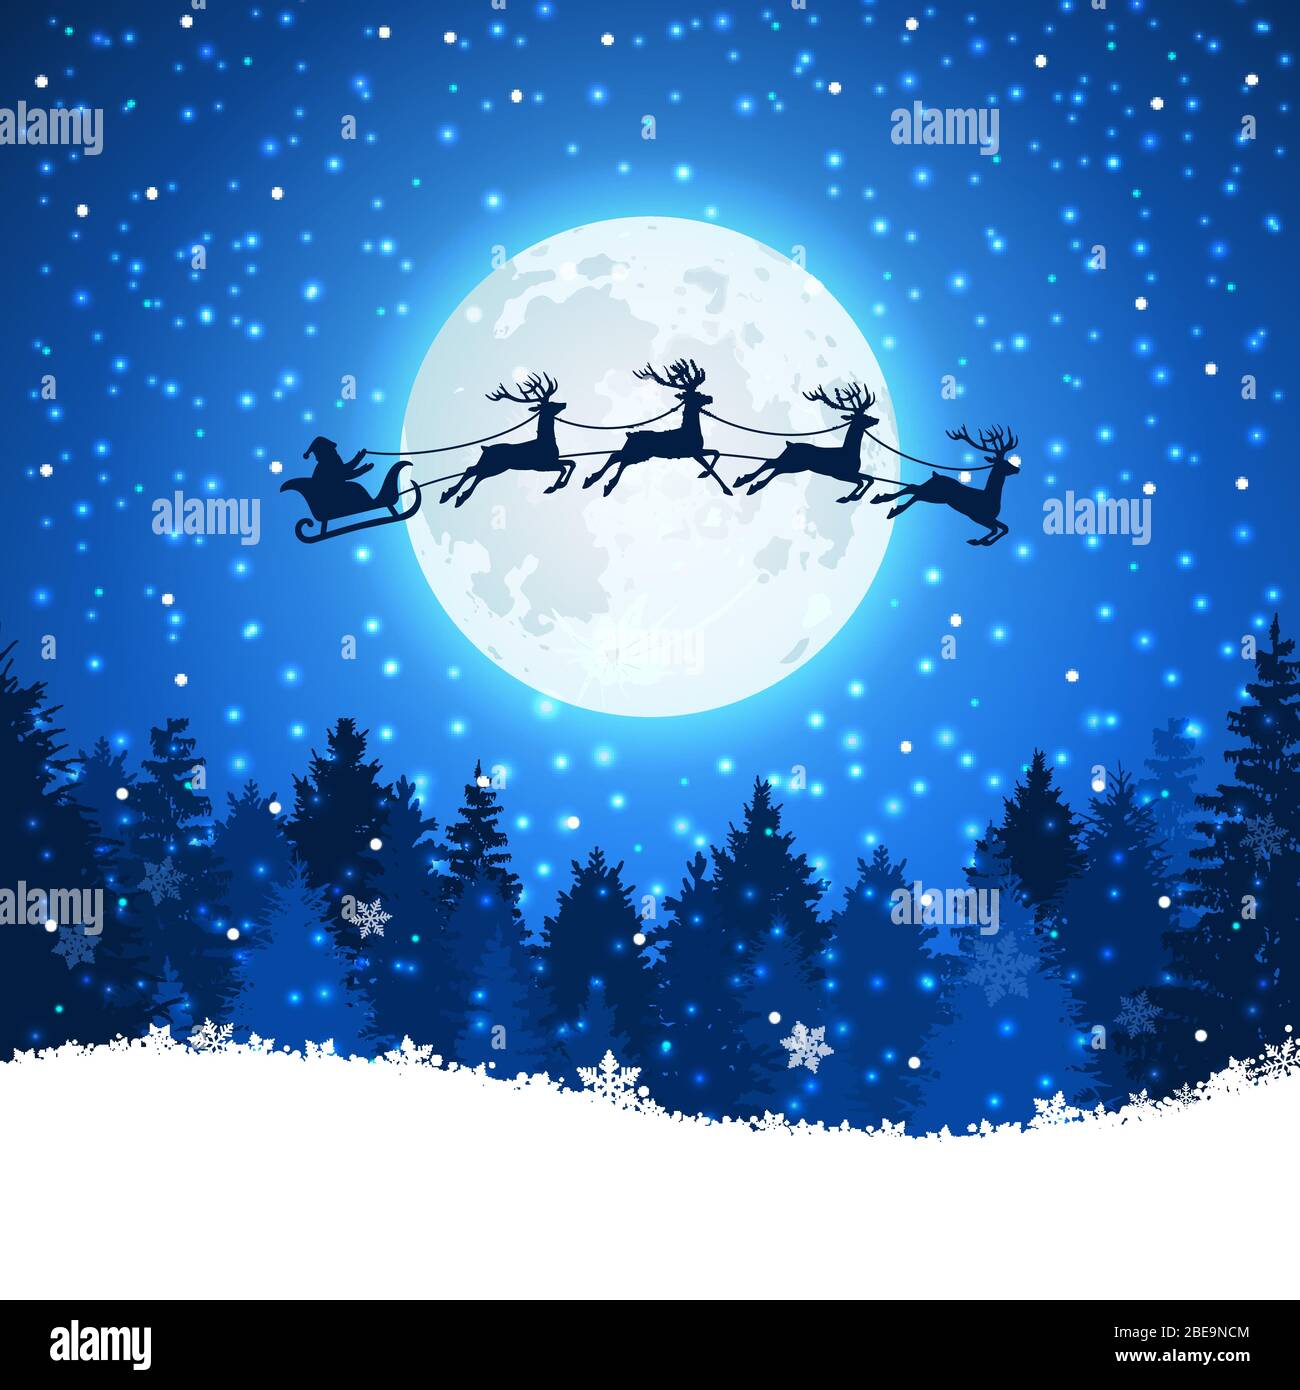 Christmas background with Santa and deers flying on the sky. Xmas concept reindeer and santa claus illustration Stock Vector